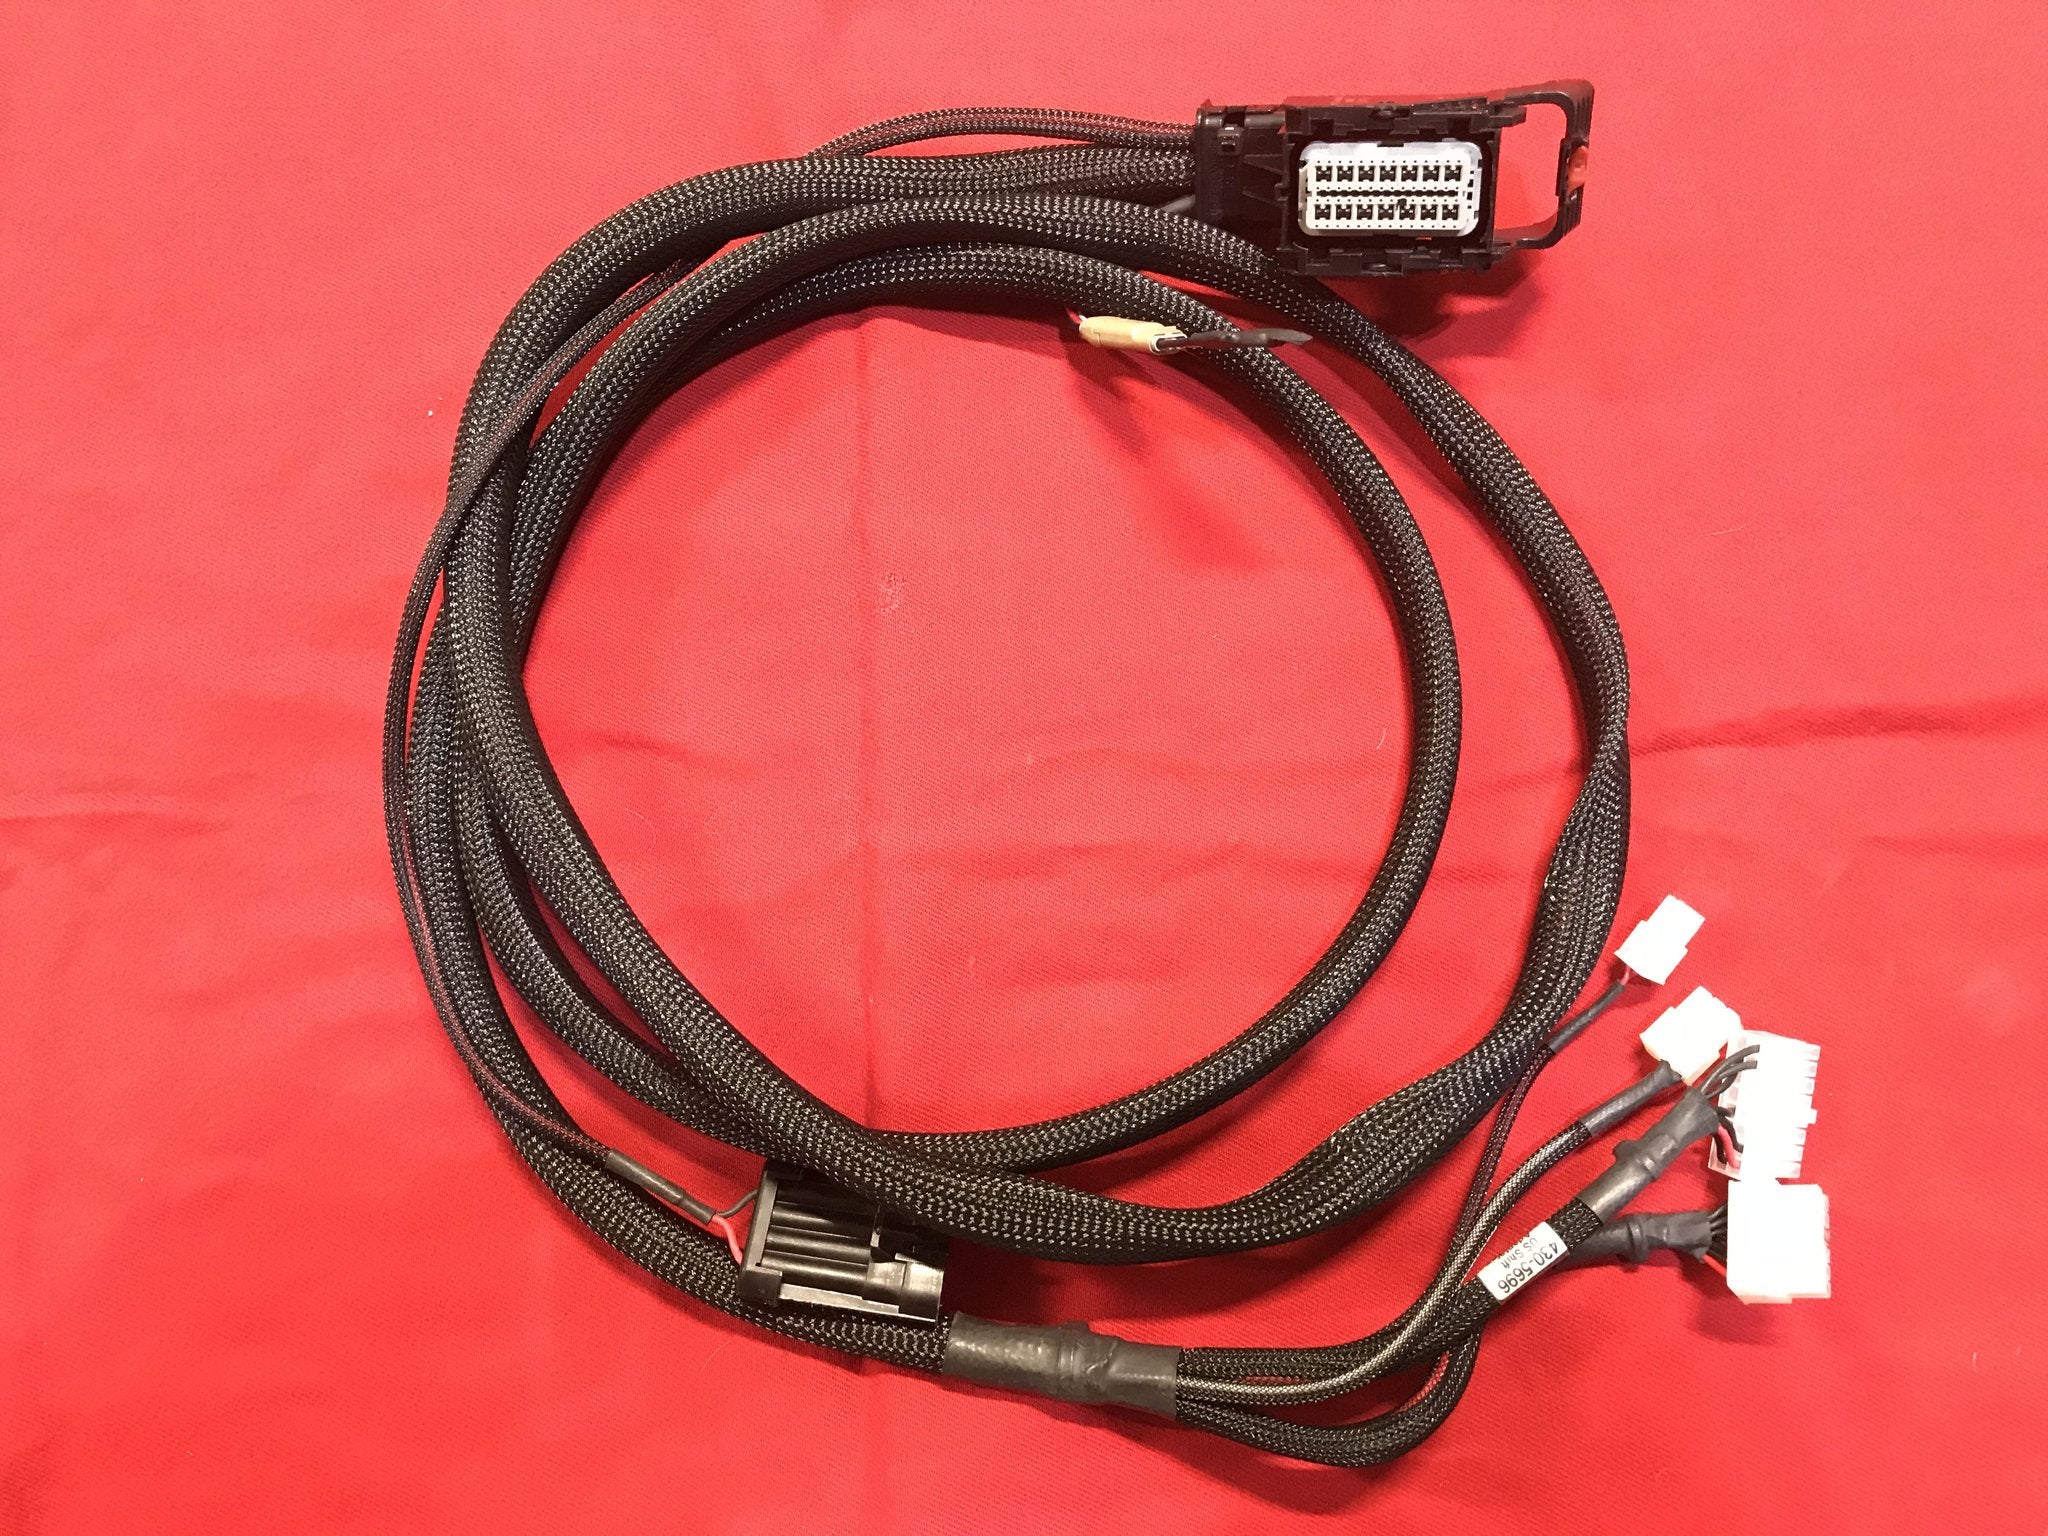 6R80 TRANSMISSION HARNESS FOR THE 2011 -2014 MUSTANG GT USING THE GATE-WAY INTERFACE MODULE